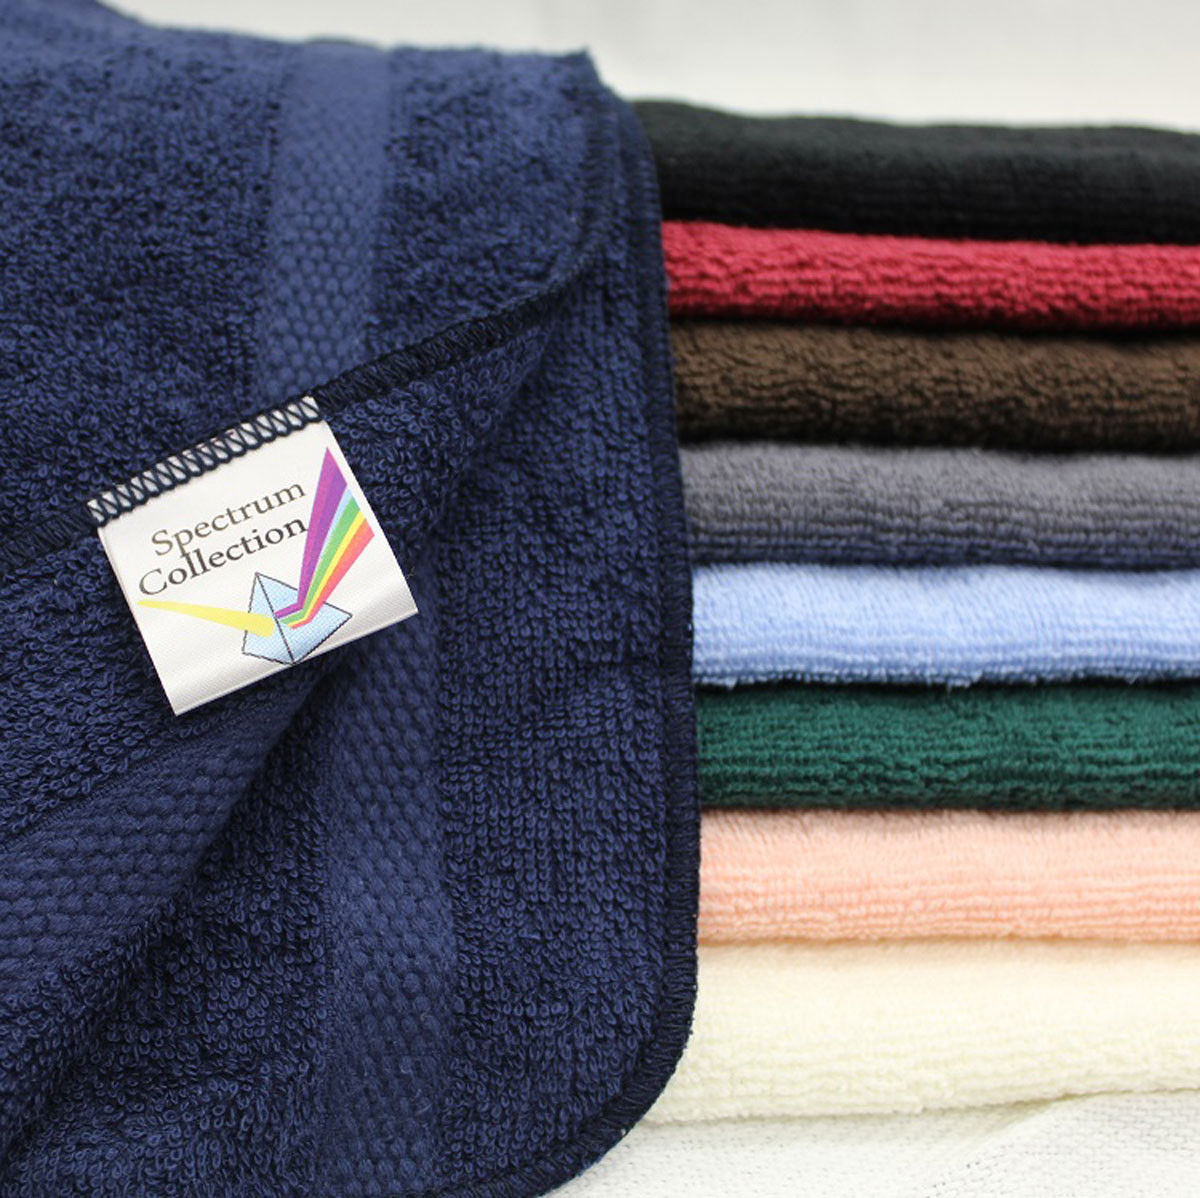 What type of yarn is used in the Spectrum hotel quality towels collection?